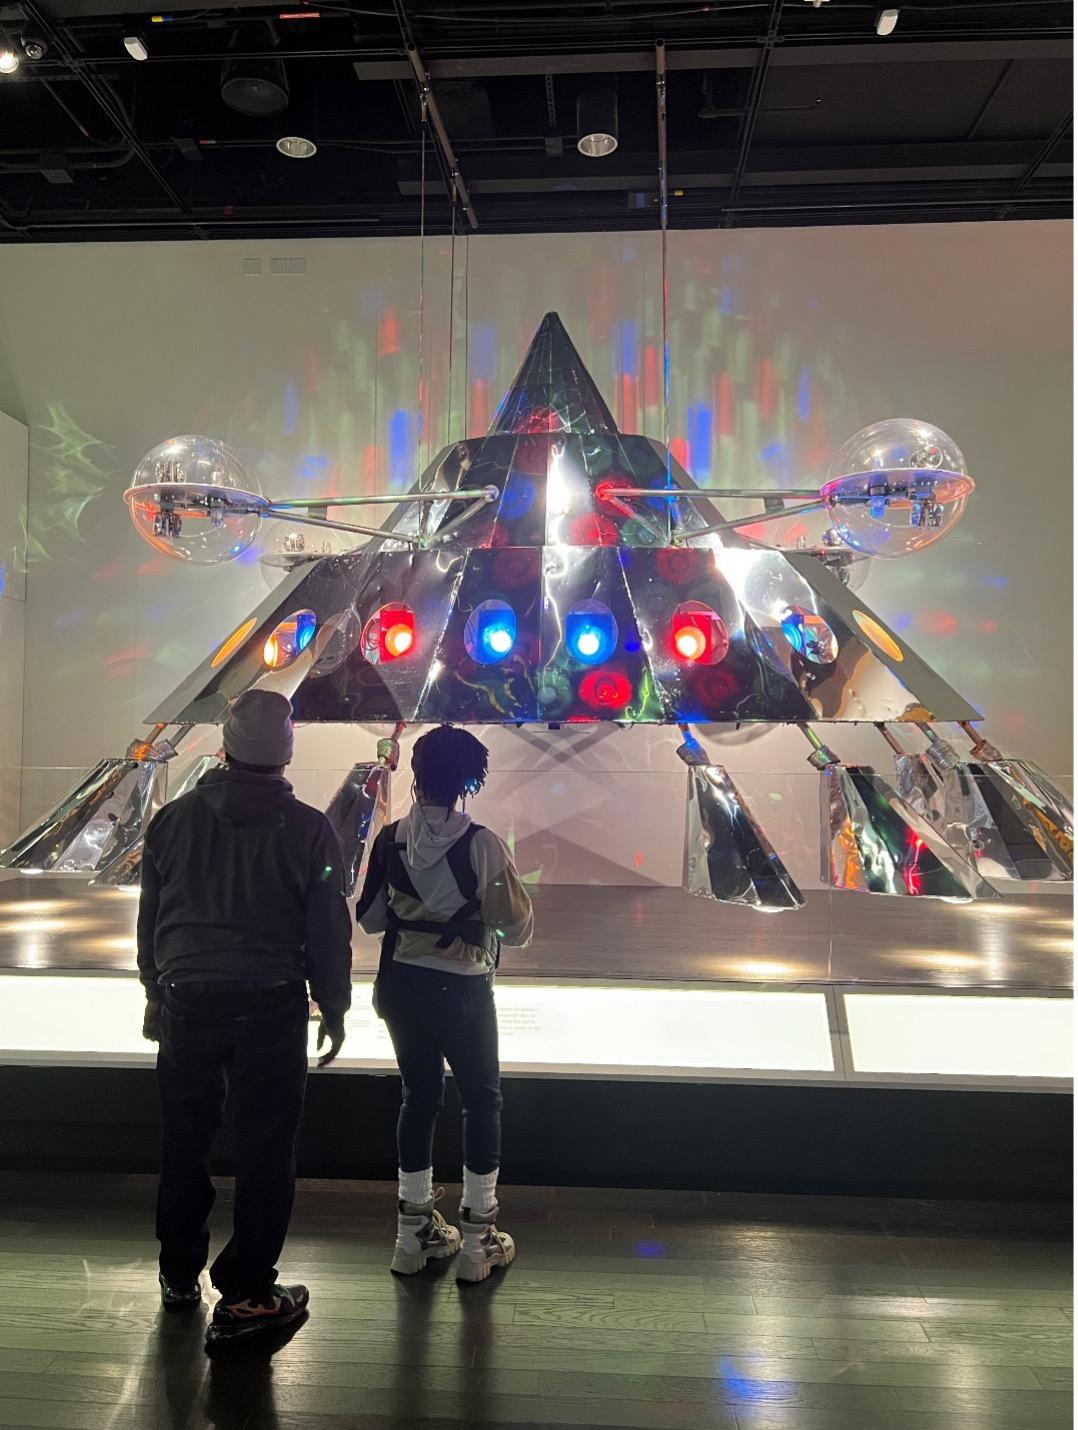 A shiny silver metal triangular spaceship with red and blue lights and eight metal legs is displayed in National Museum of African American History and Culture. Two museum visitors stand in front of the spaceship and read a description panel.